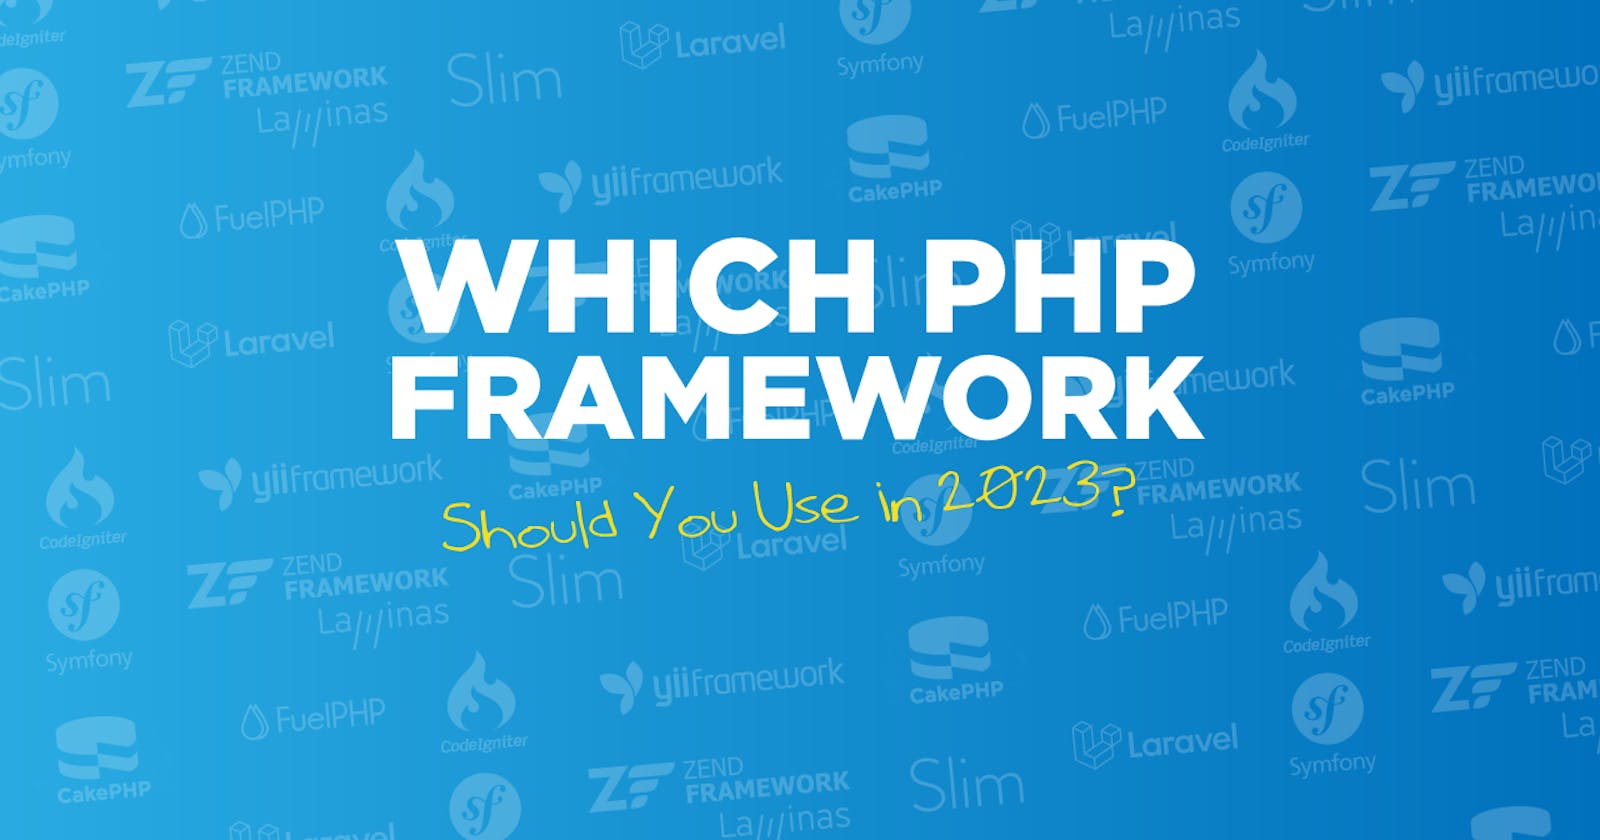 Which PHP Framework Should You Use in 2023?